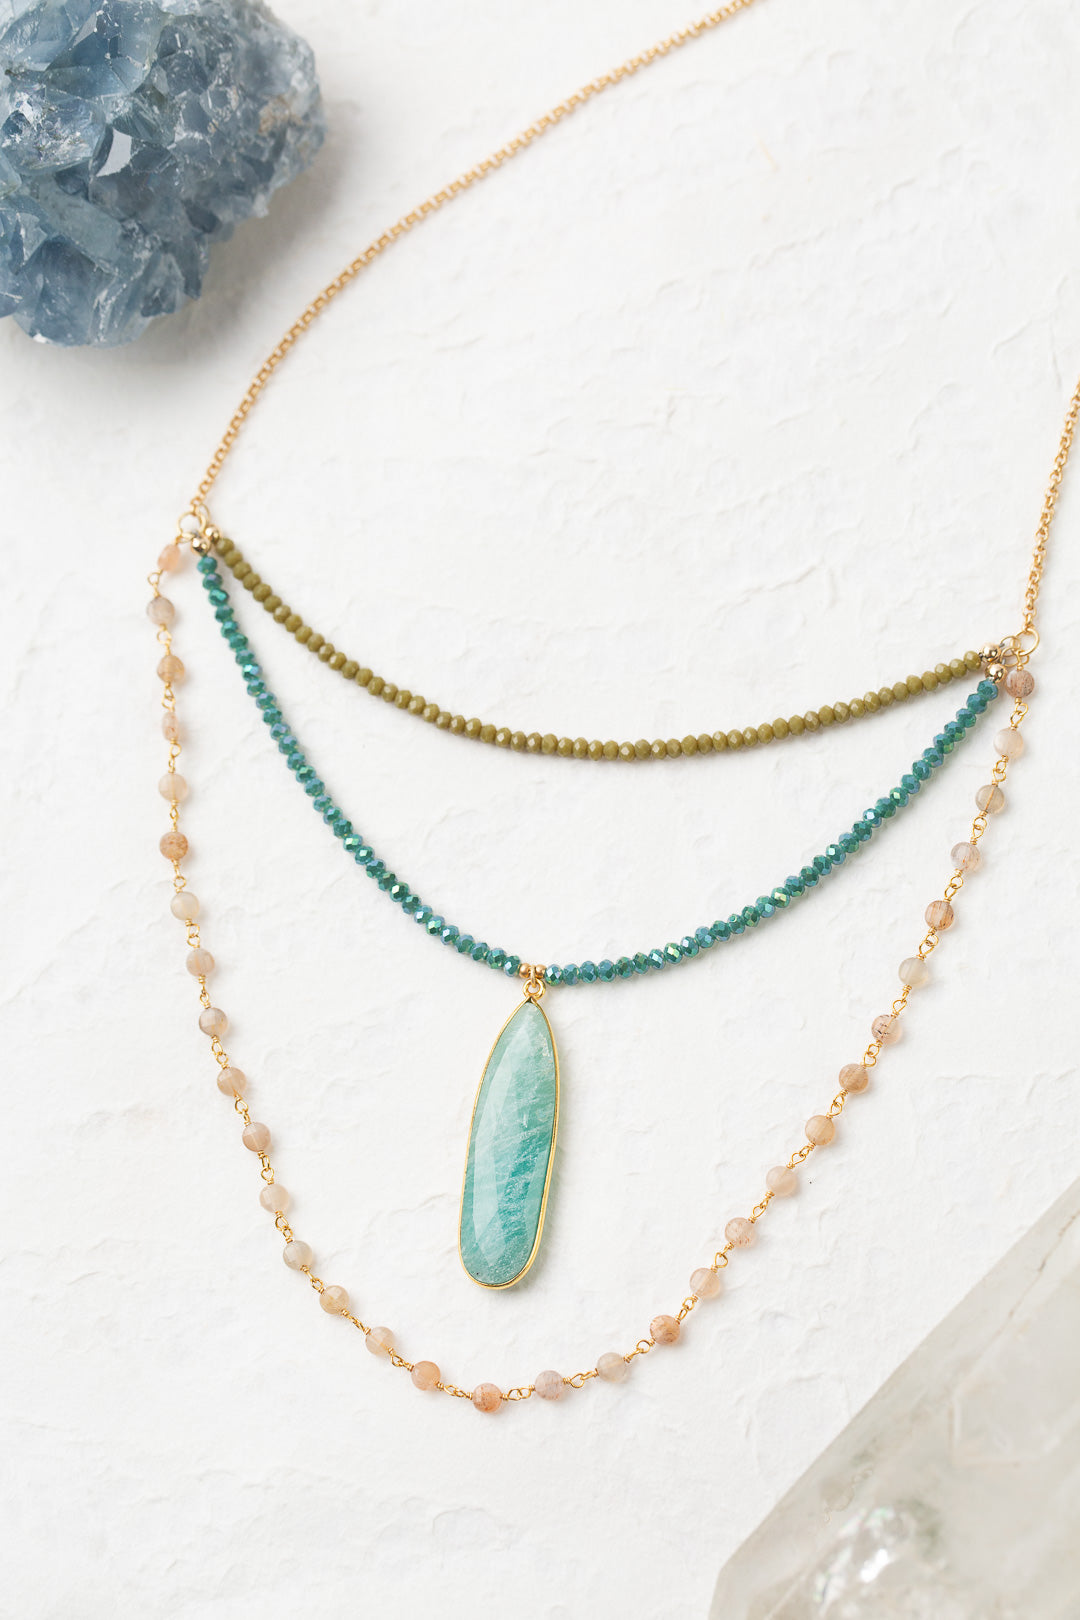 Waterfall 19-21" Moonstone, Crystal with Amazonite Multistrand Necklace